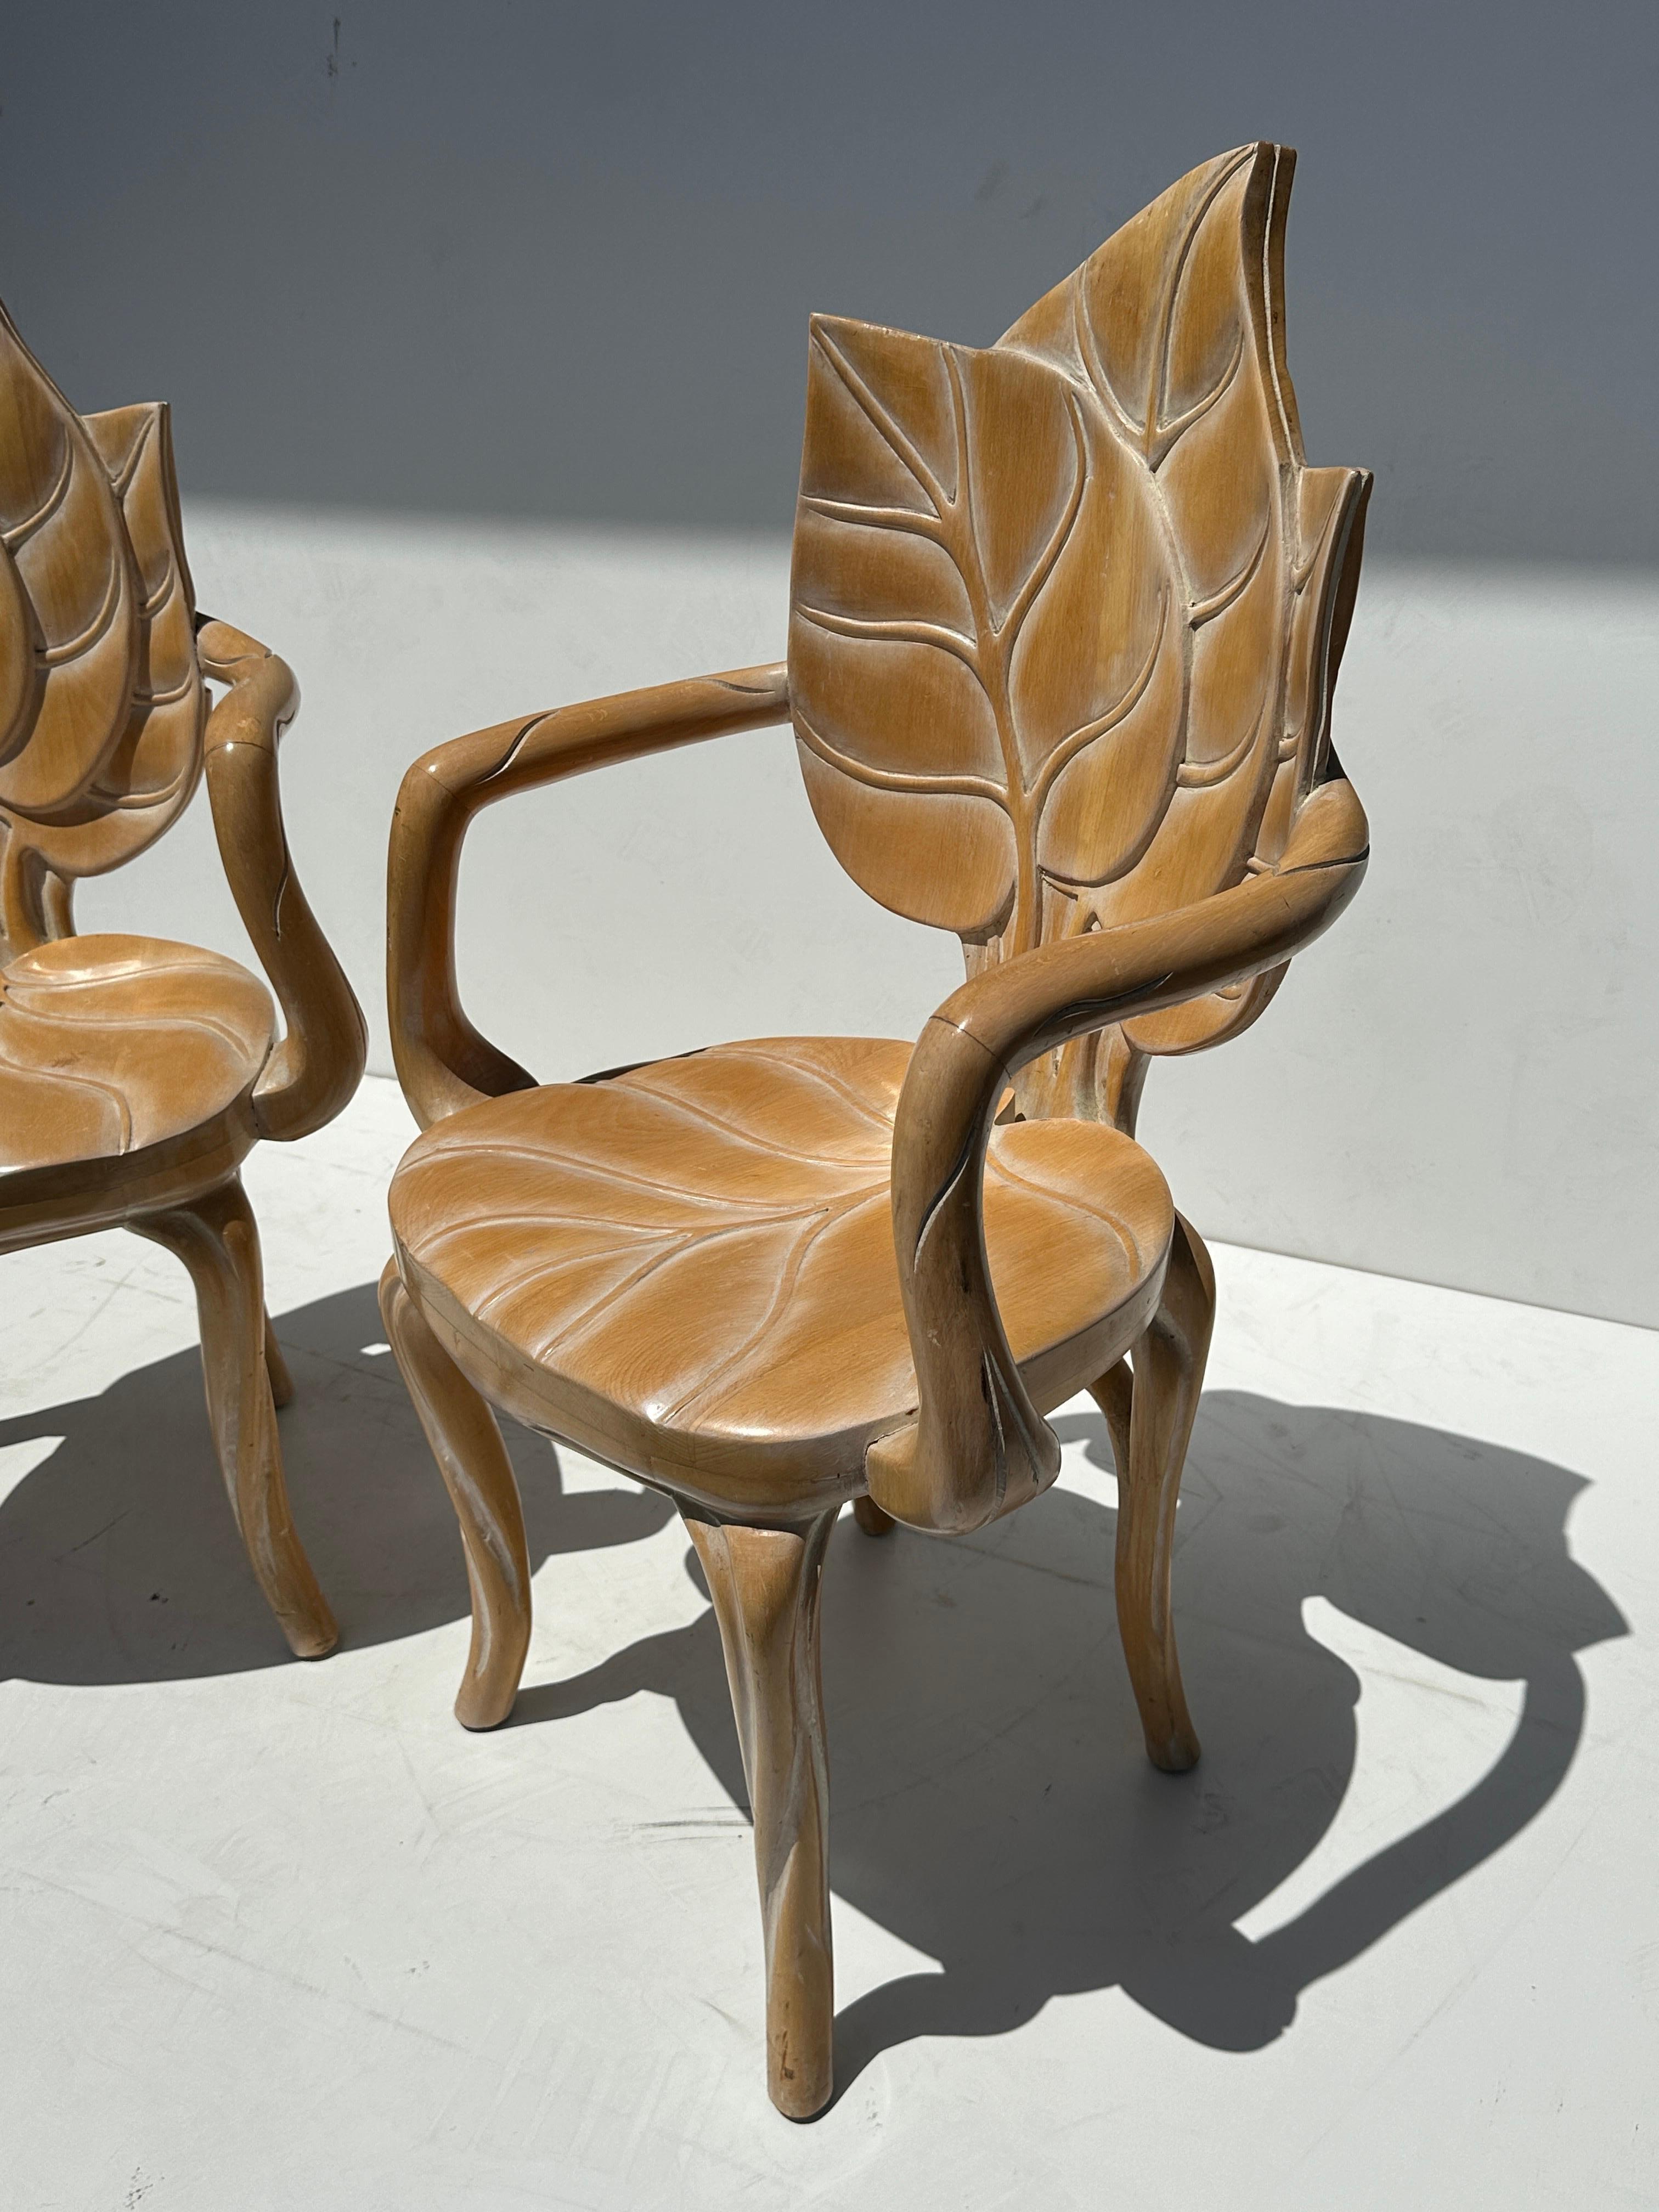 Pair of Italian hand carved rhubarb Grotto style leaf armchairs by Bartolozzi and Maioli
Chairs are made of durable solid European beechwood and finished in light brown stain in whitewashed technique. 